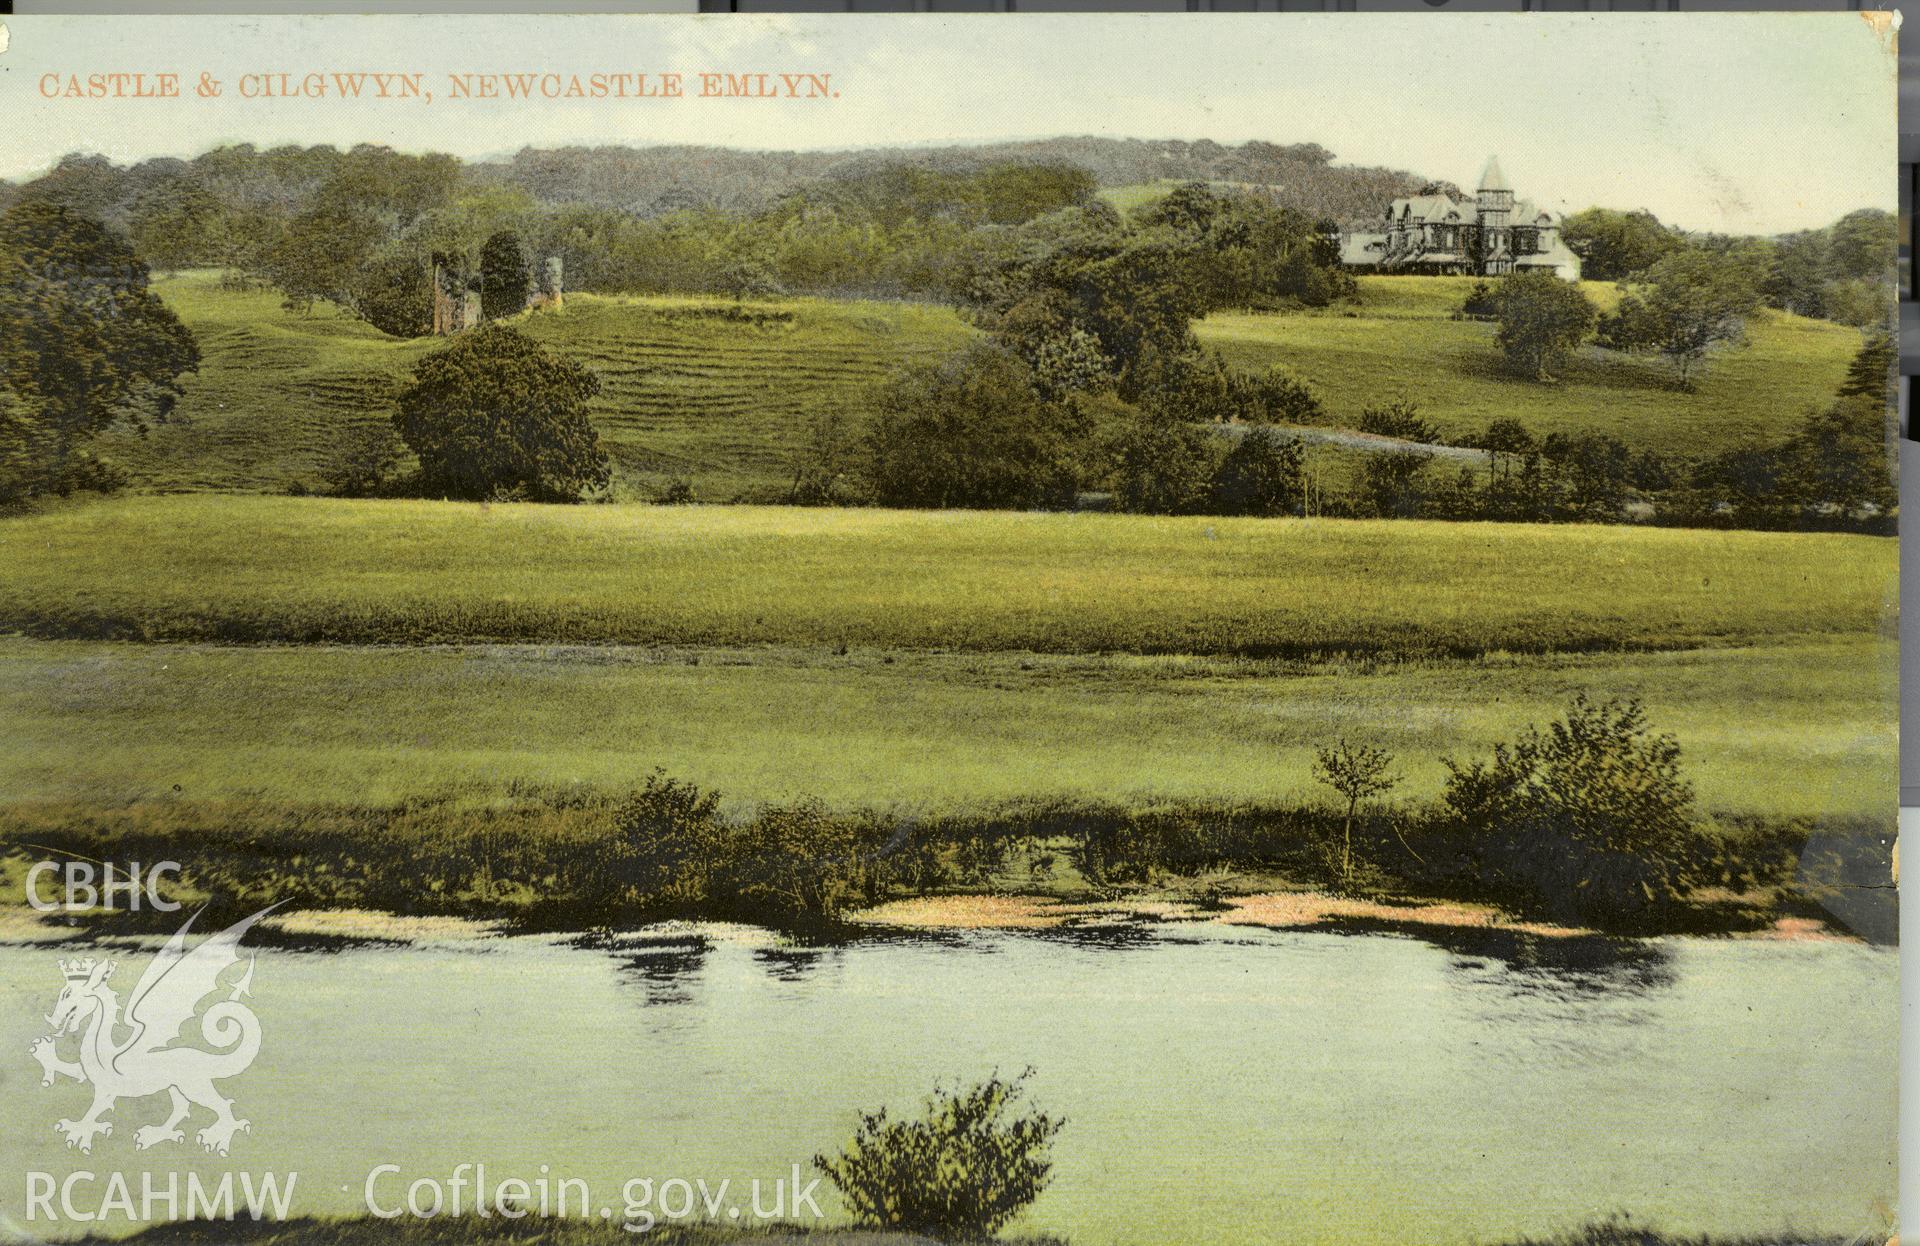 Digitised postcard image of Old Cilgwyn, Newcastle Emlyn. Produced by Parks and Gardens Data Services, from an original item in the Peter Davis Collection at Parks and Gardens UK. We hold only web-resolution images of this collection, suitable for viewing on screen and for research purposes only. We do not hold the original images, or publication quality scans.